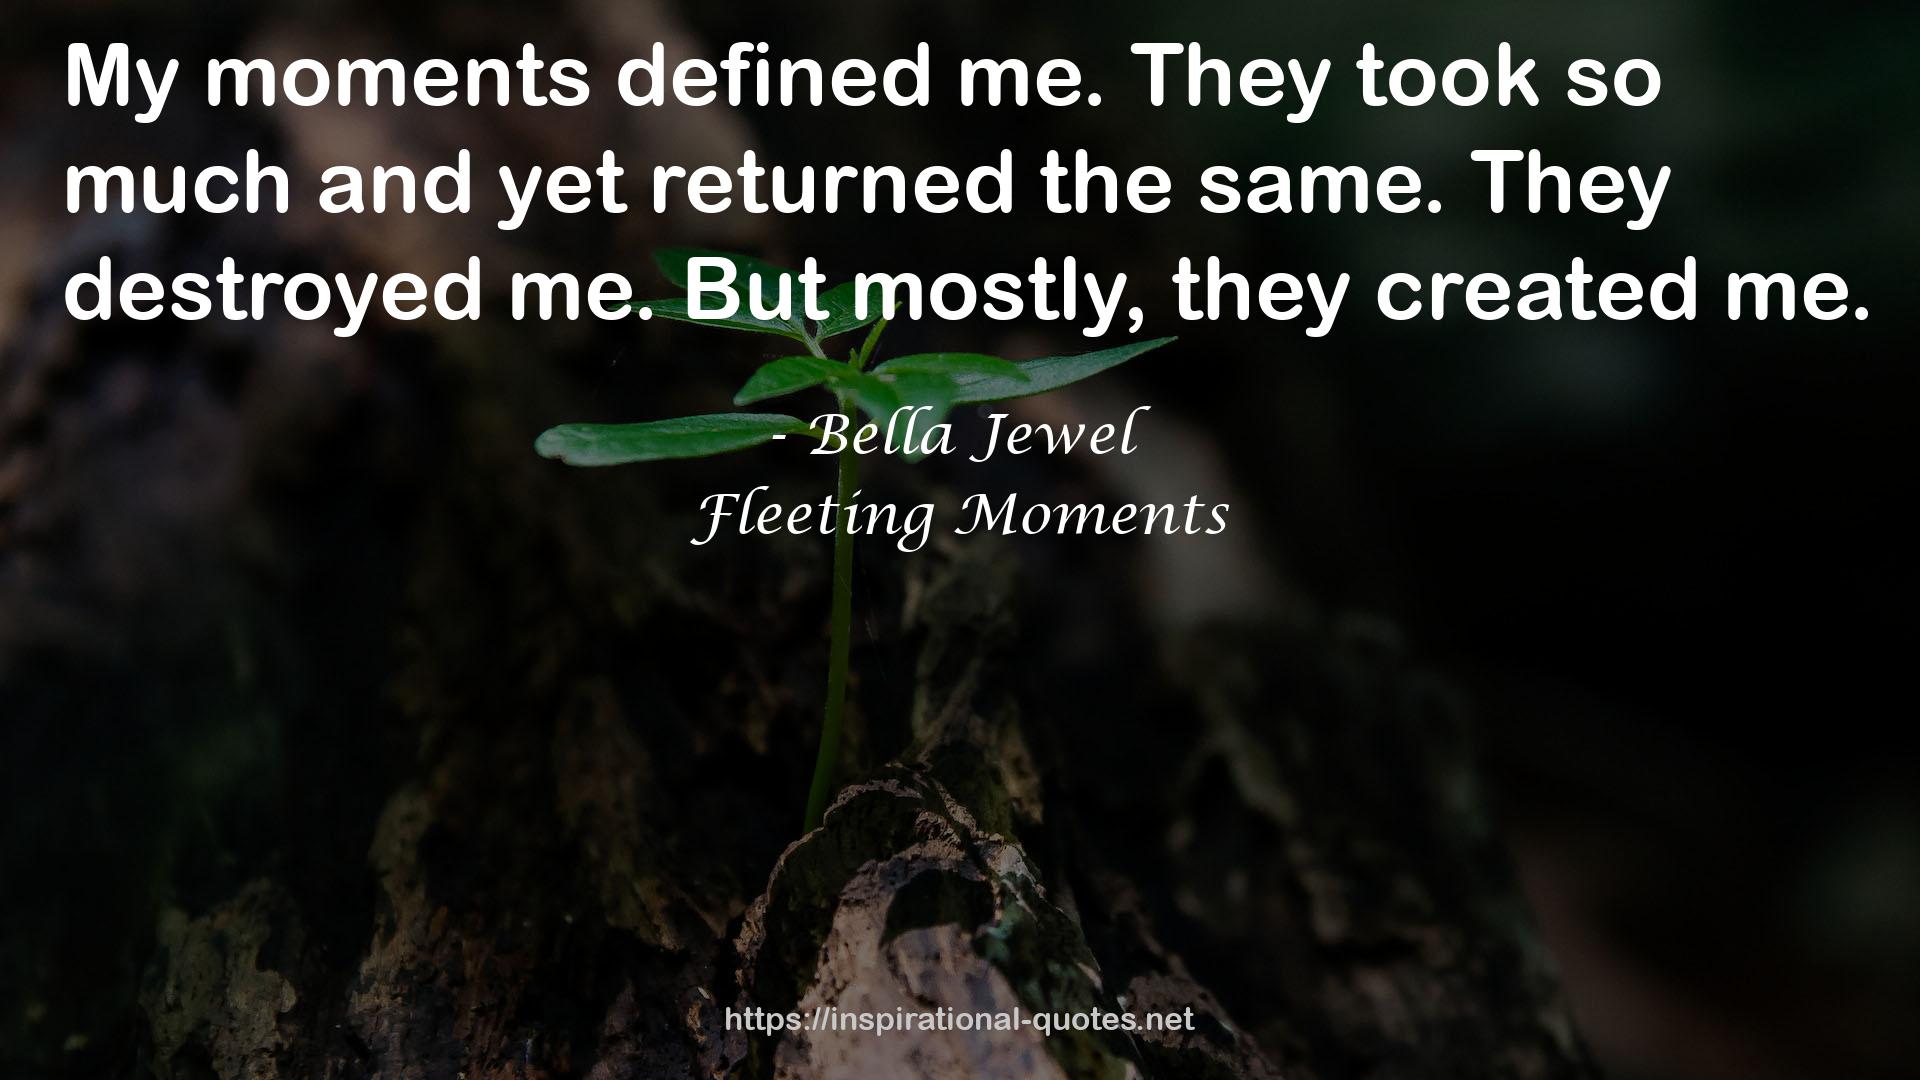 Fleeting Moments QUOTES